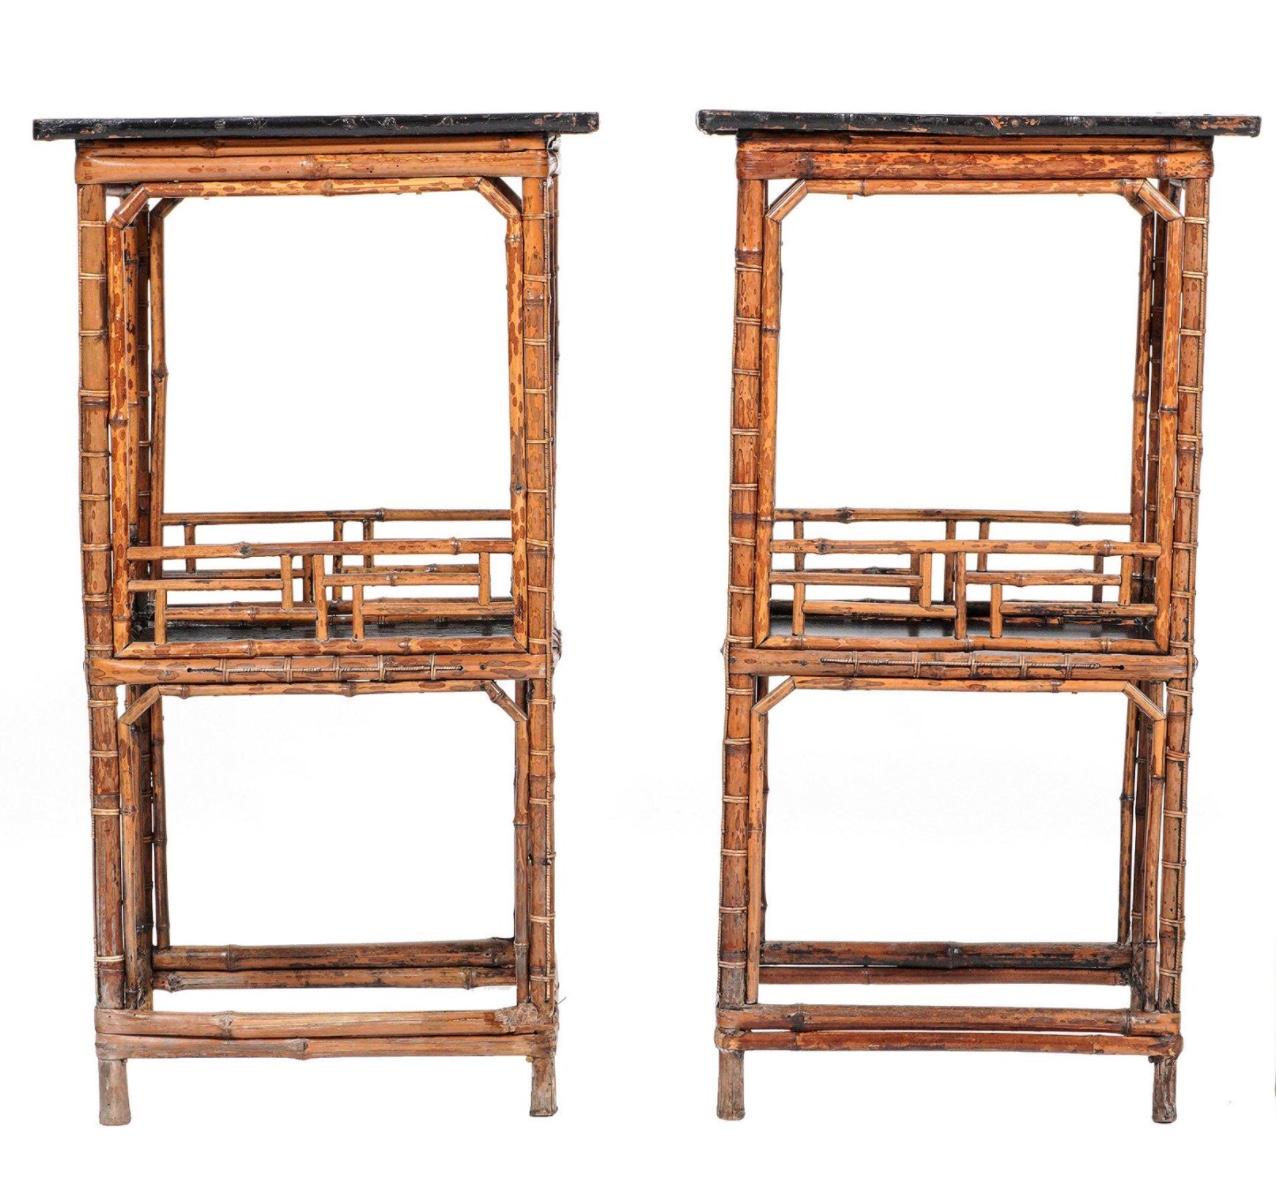 Pair 19th century Chinese tall bamboo side tables. Chinese side tables, finished on all 4 sides, 19th century, lacquered bamboo structure and lacquered wood top. Perfect as a pair of side tables or used as pedestals for display purposes. They will